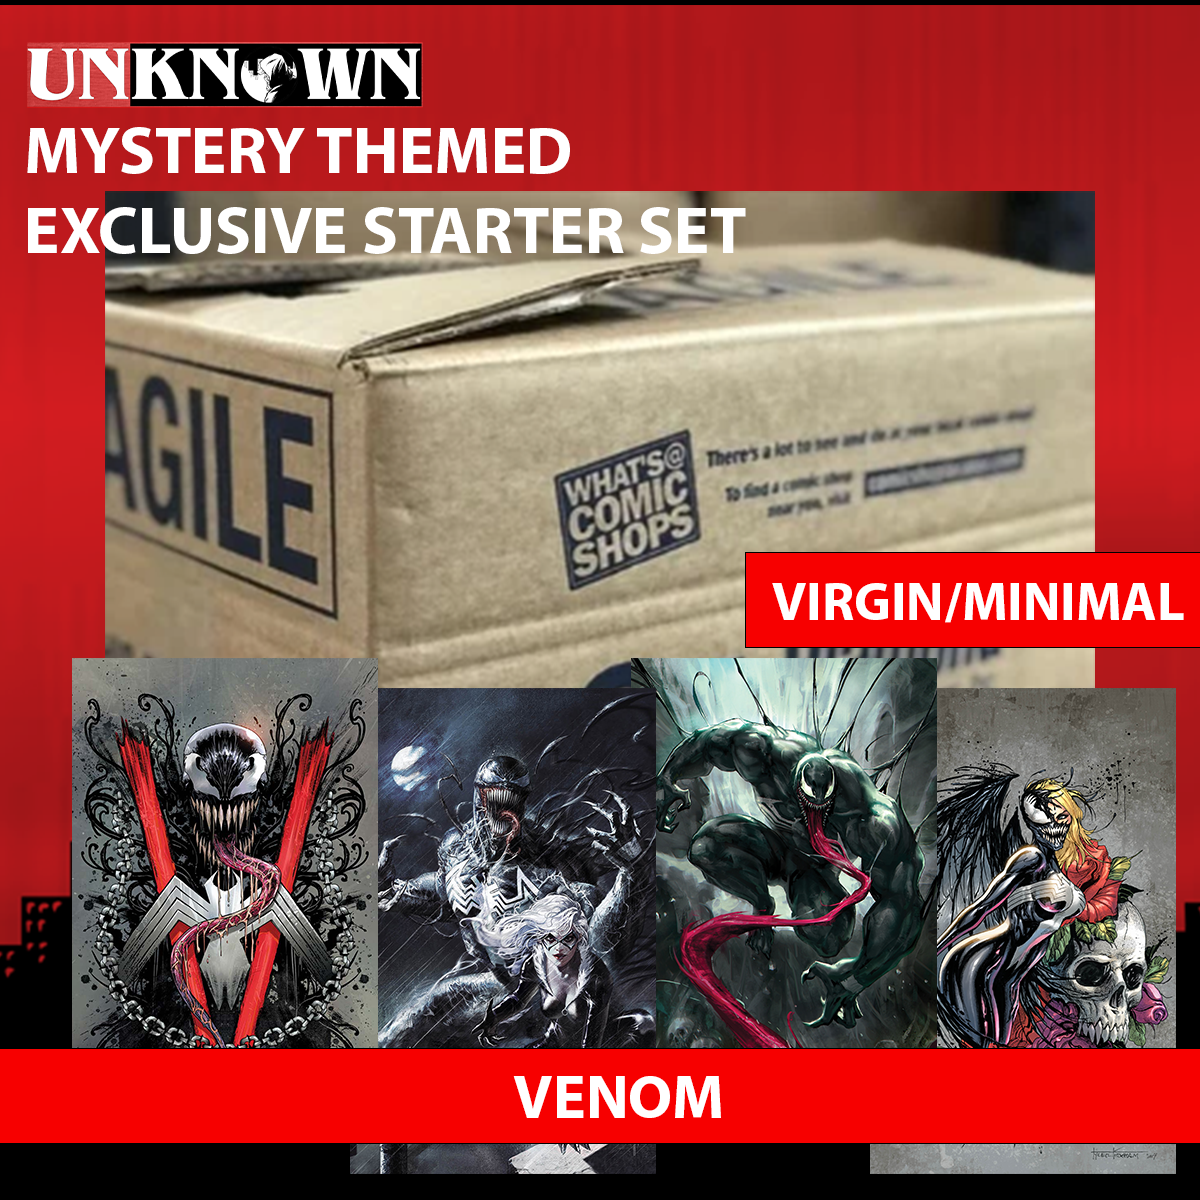 UNKNOWN COMICS MYSTERY THEMED 👉VENOM STORE EXCLUSIVE STARTER SET: MIXED CASE OF EXCLUSIVE COMIC BOOKS 👉VIRGIN / MINIMAL ESTIMATED 120-200 COMICS (12/06/2023)